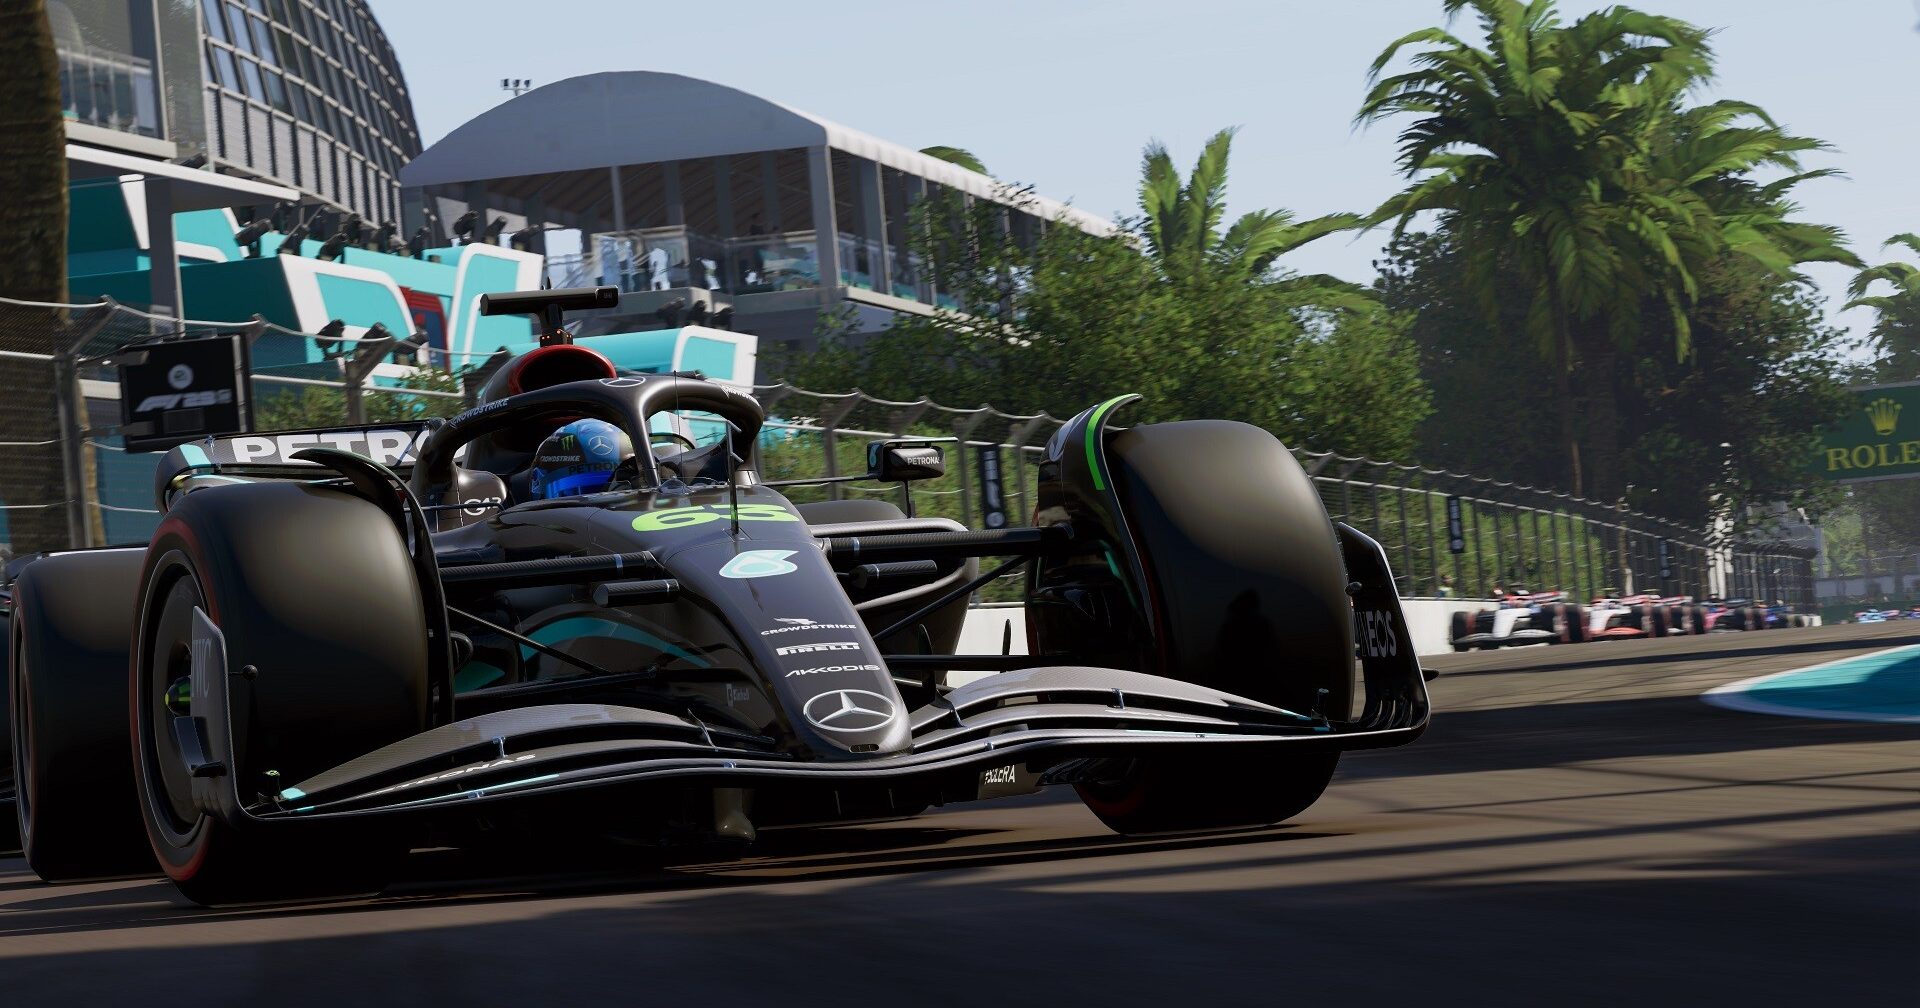 The gameplay of F1 23 got tweaked in different ways. Here we see a black race car from the front on the racing track.